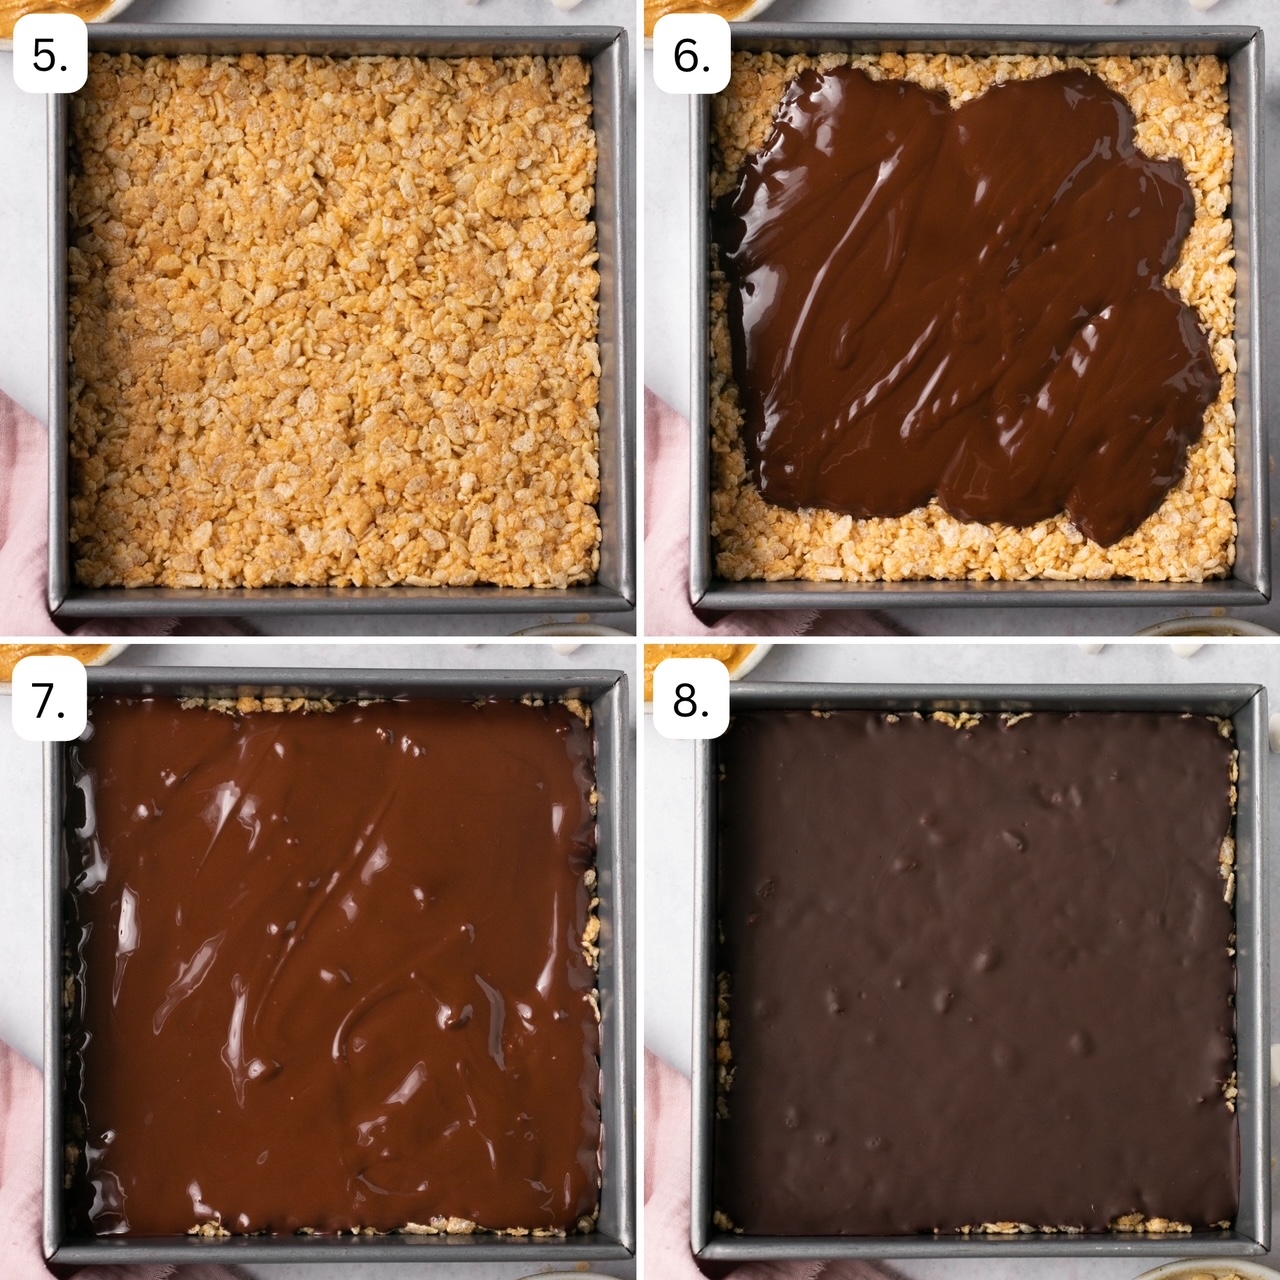 the second set of steps for making chocolate covered rice krispie treats